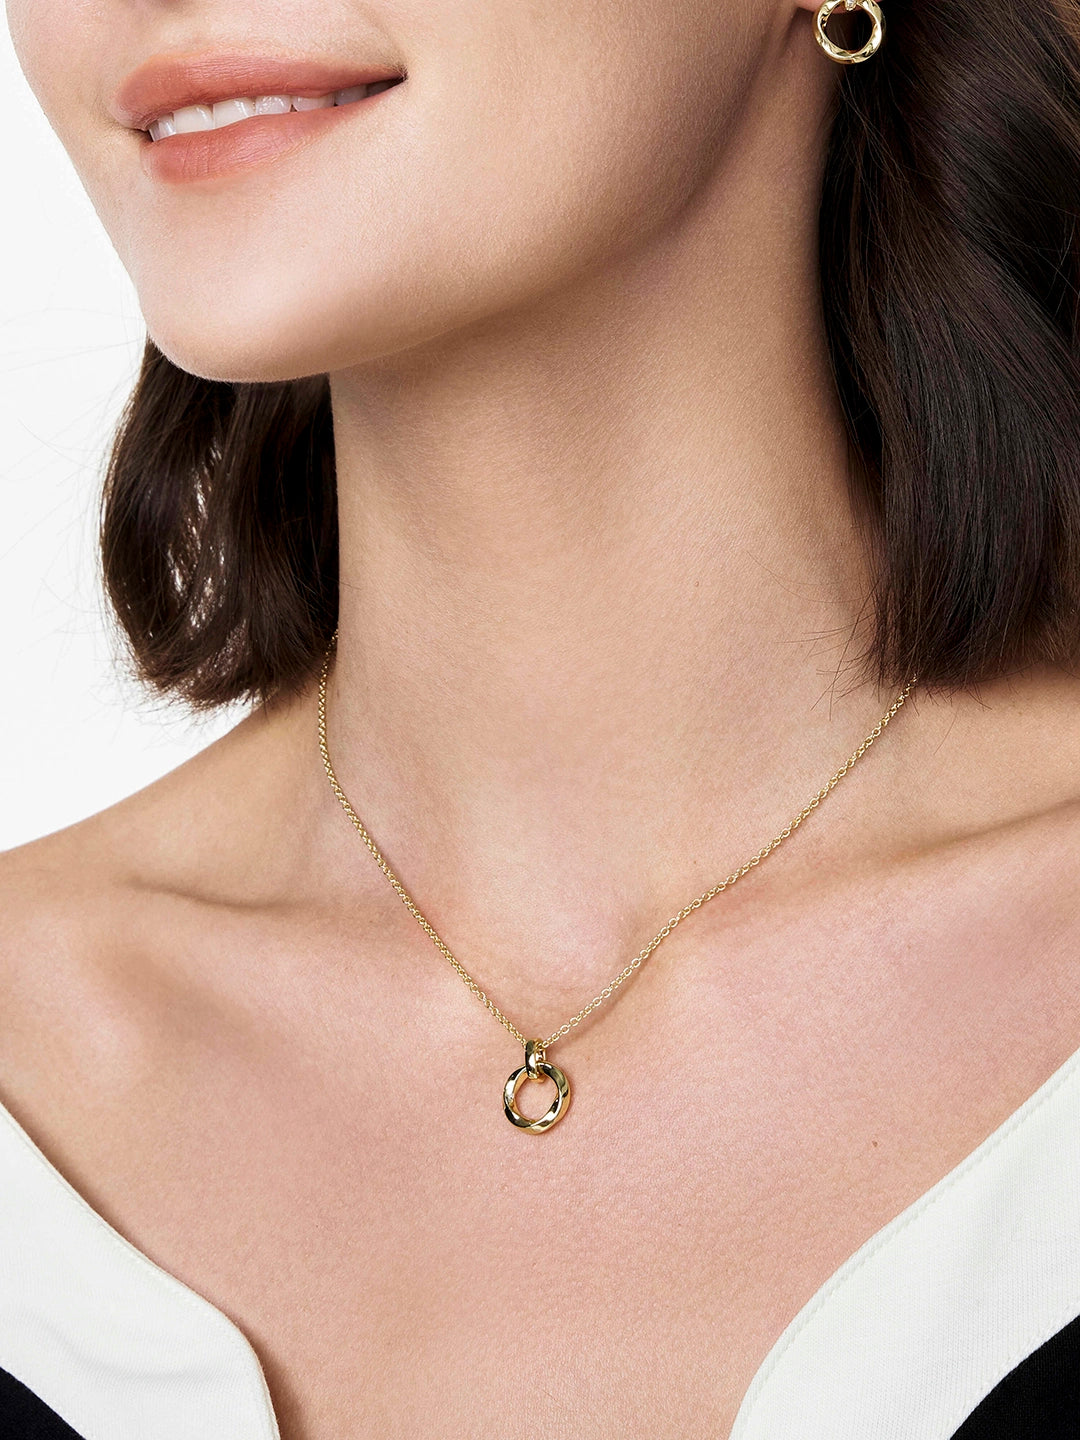 Mobius Classical Pendant Necklace - OOTDY